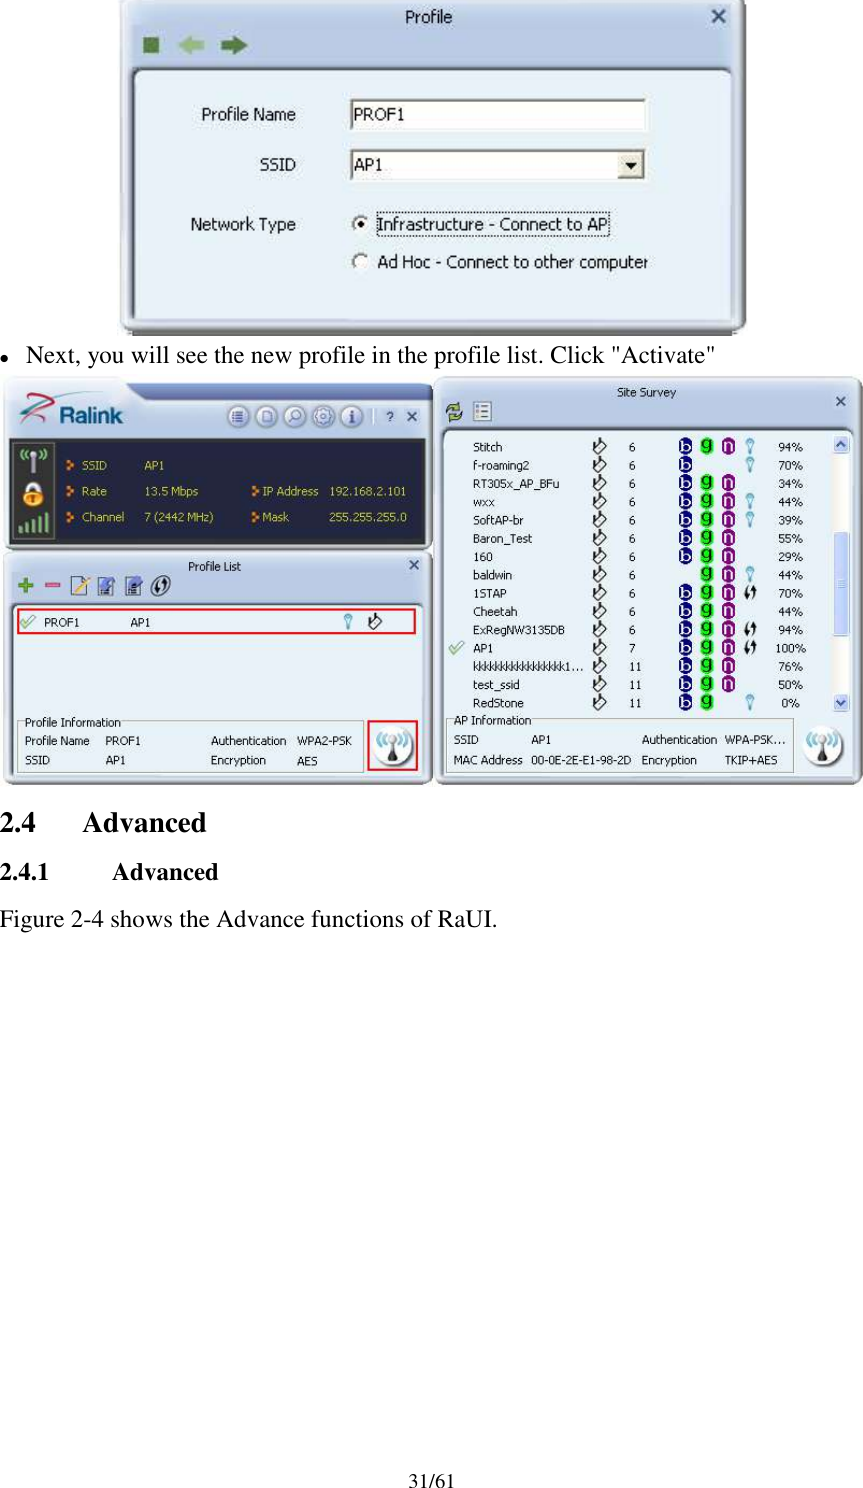 31/61Next, you will see the new profile in the profile list. Click &quot;Activate&quot;2.4 Advanced2.4.1 AdvancedFigure 2-4 shows the Advance functions of RaUI.